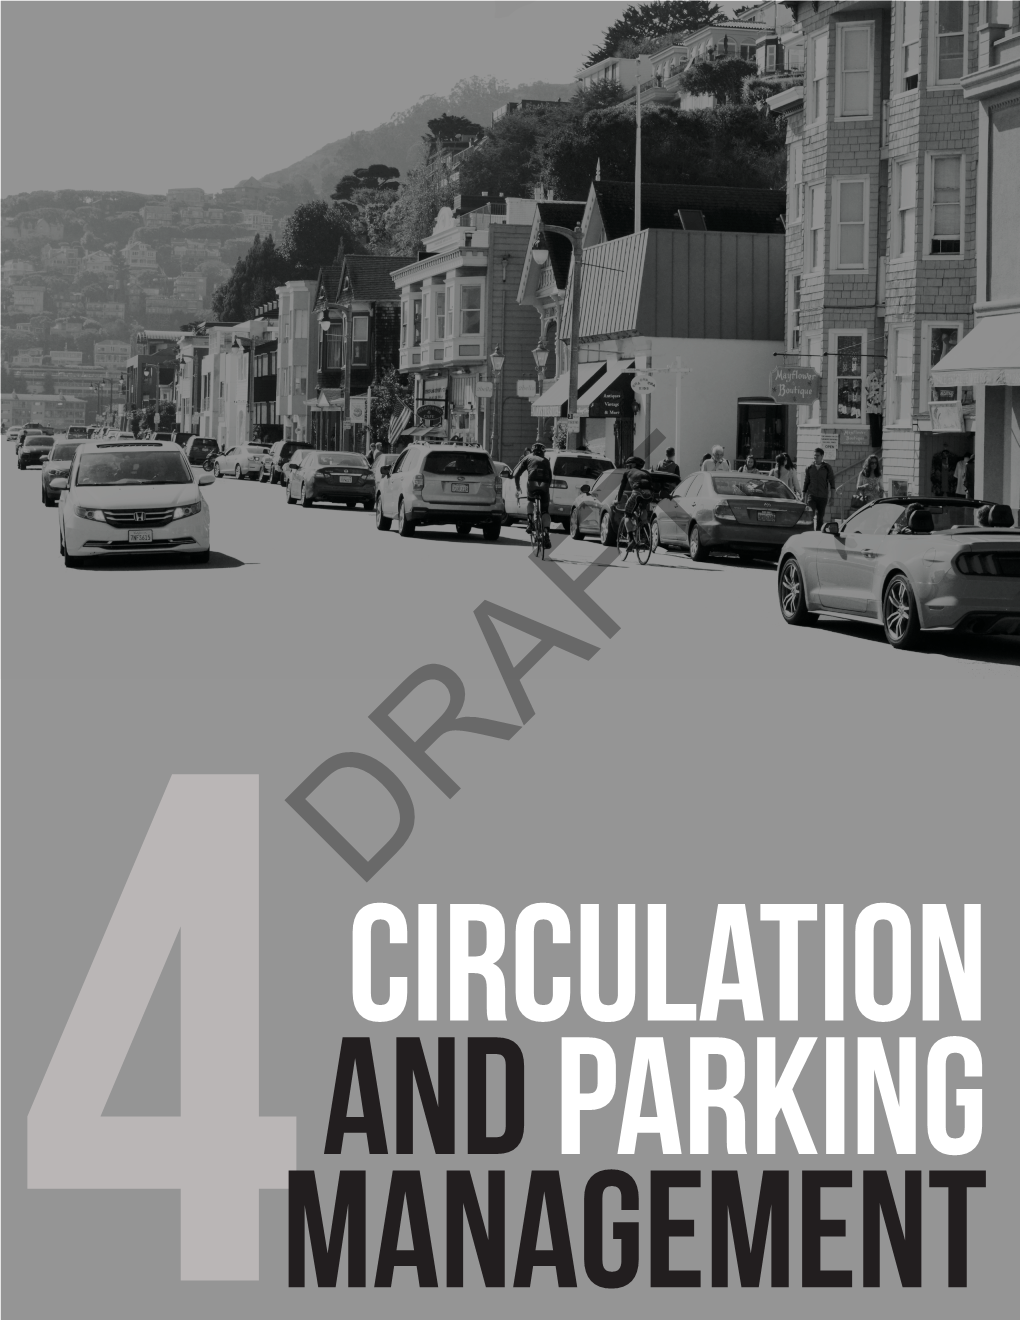 CIRCULATION and PARKING MANAGEMENT EXECUTIVE SUMMARY | I City of Sausalito General Plan Update